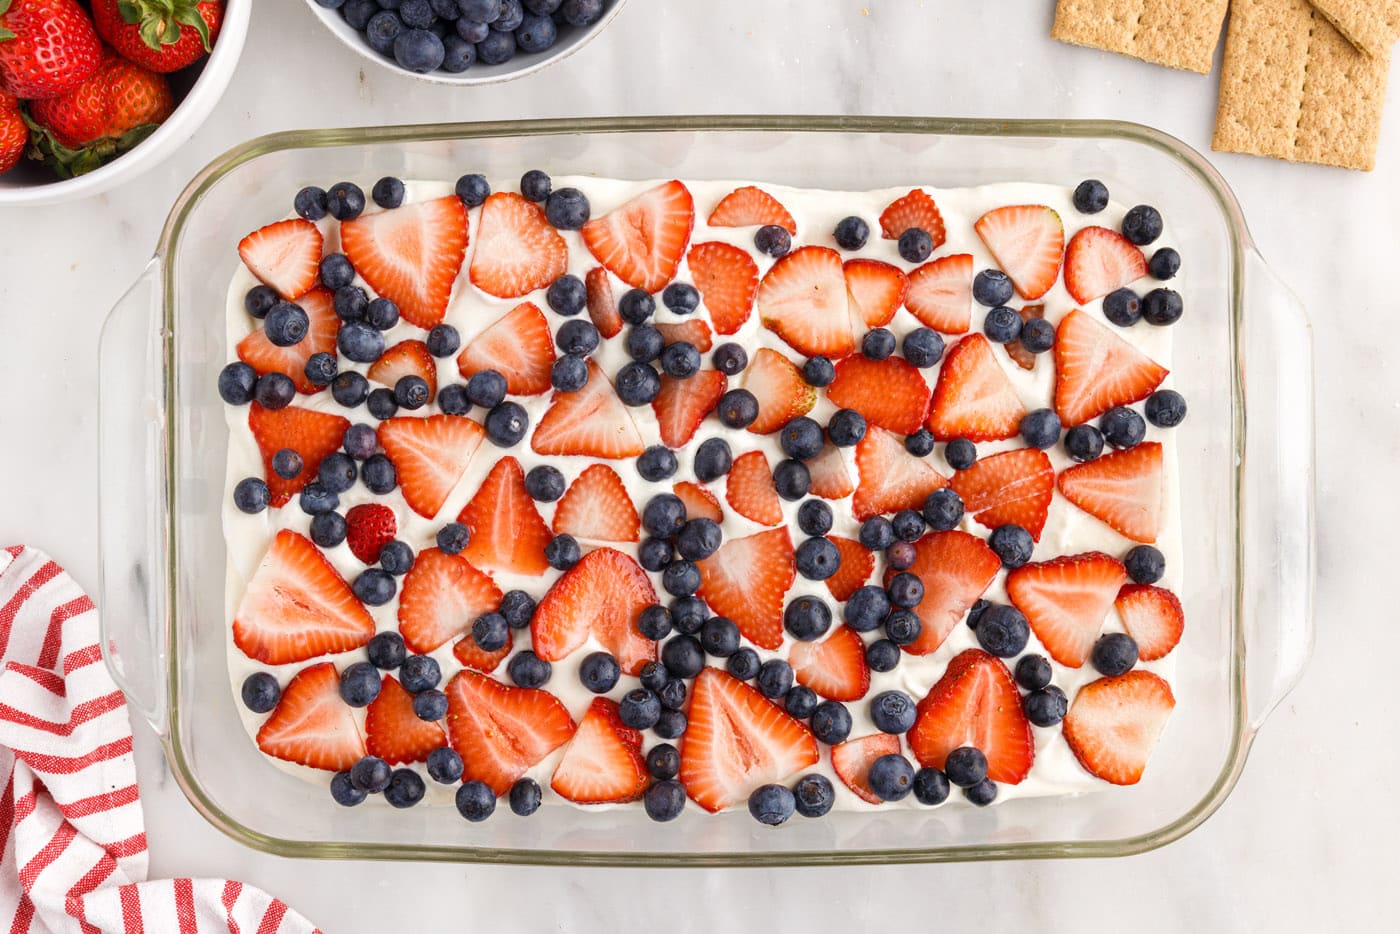 Layer of strawberries and blueberries over the cream cheese pudding mixture